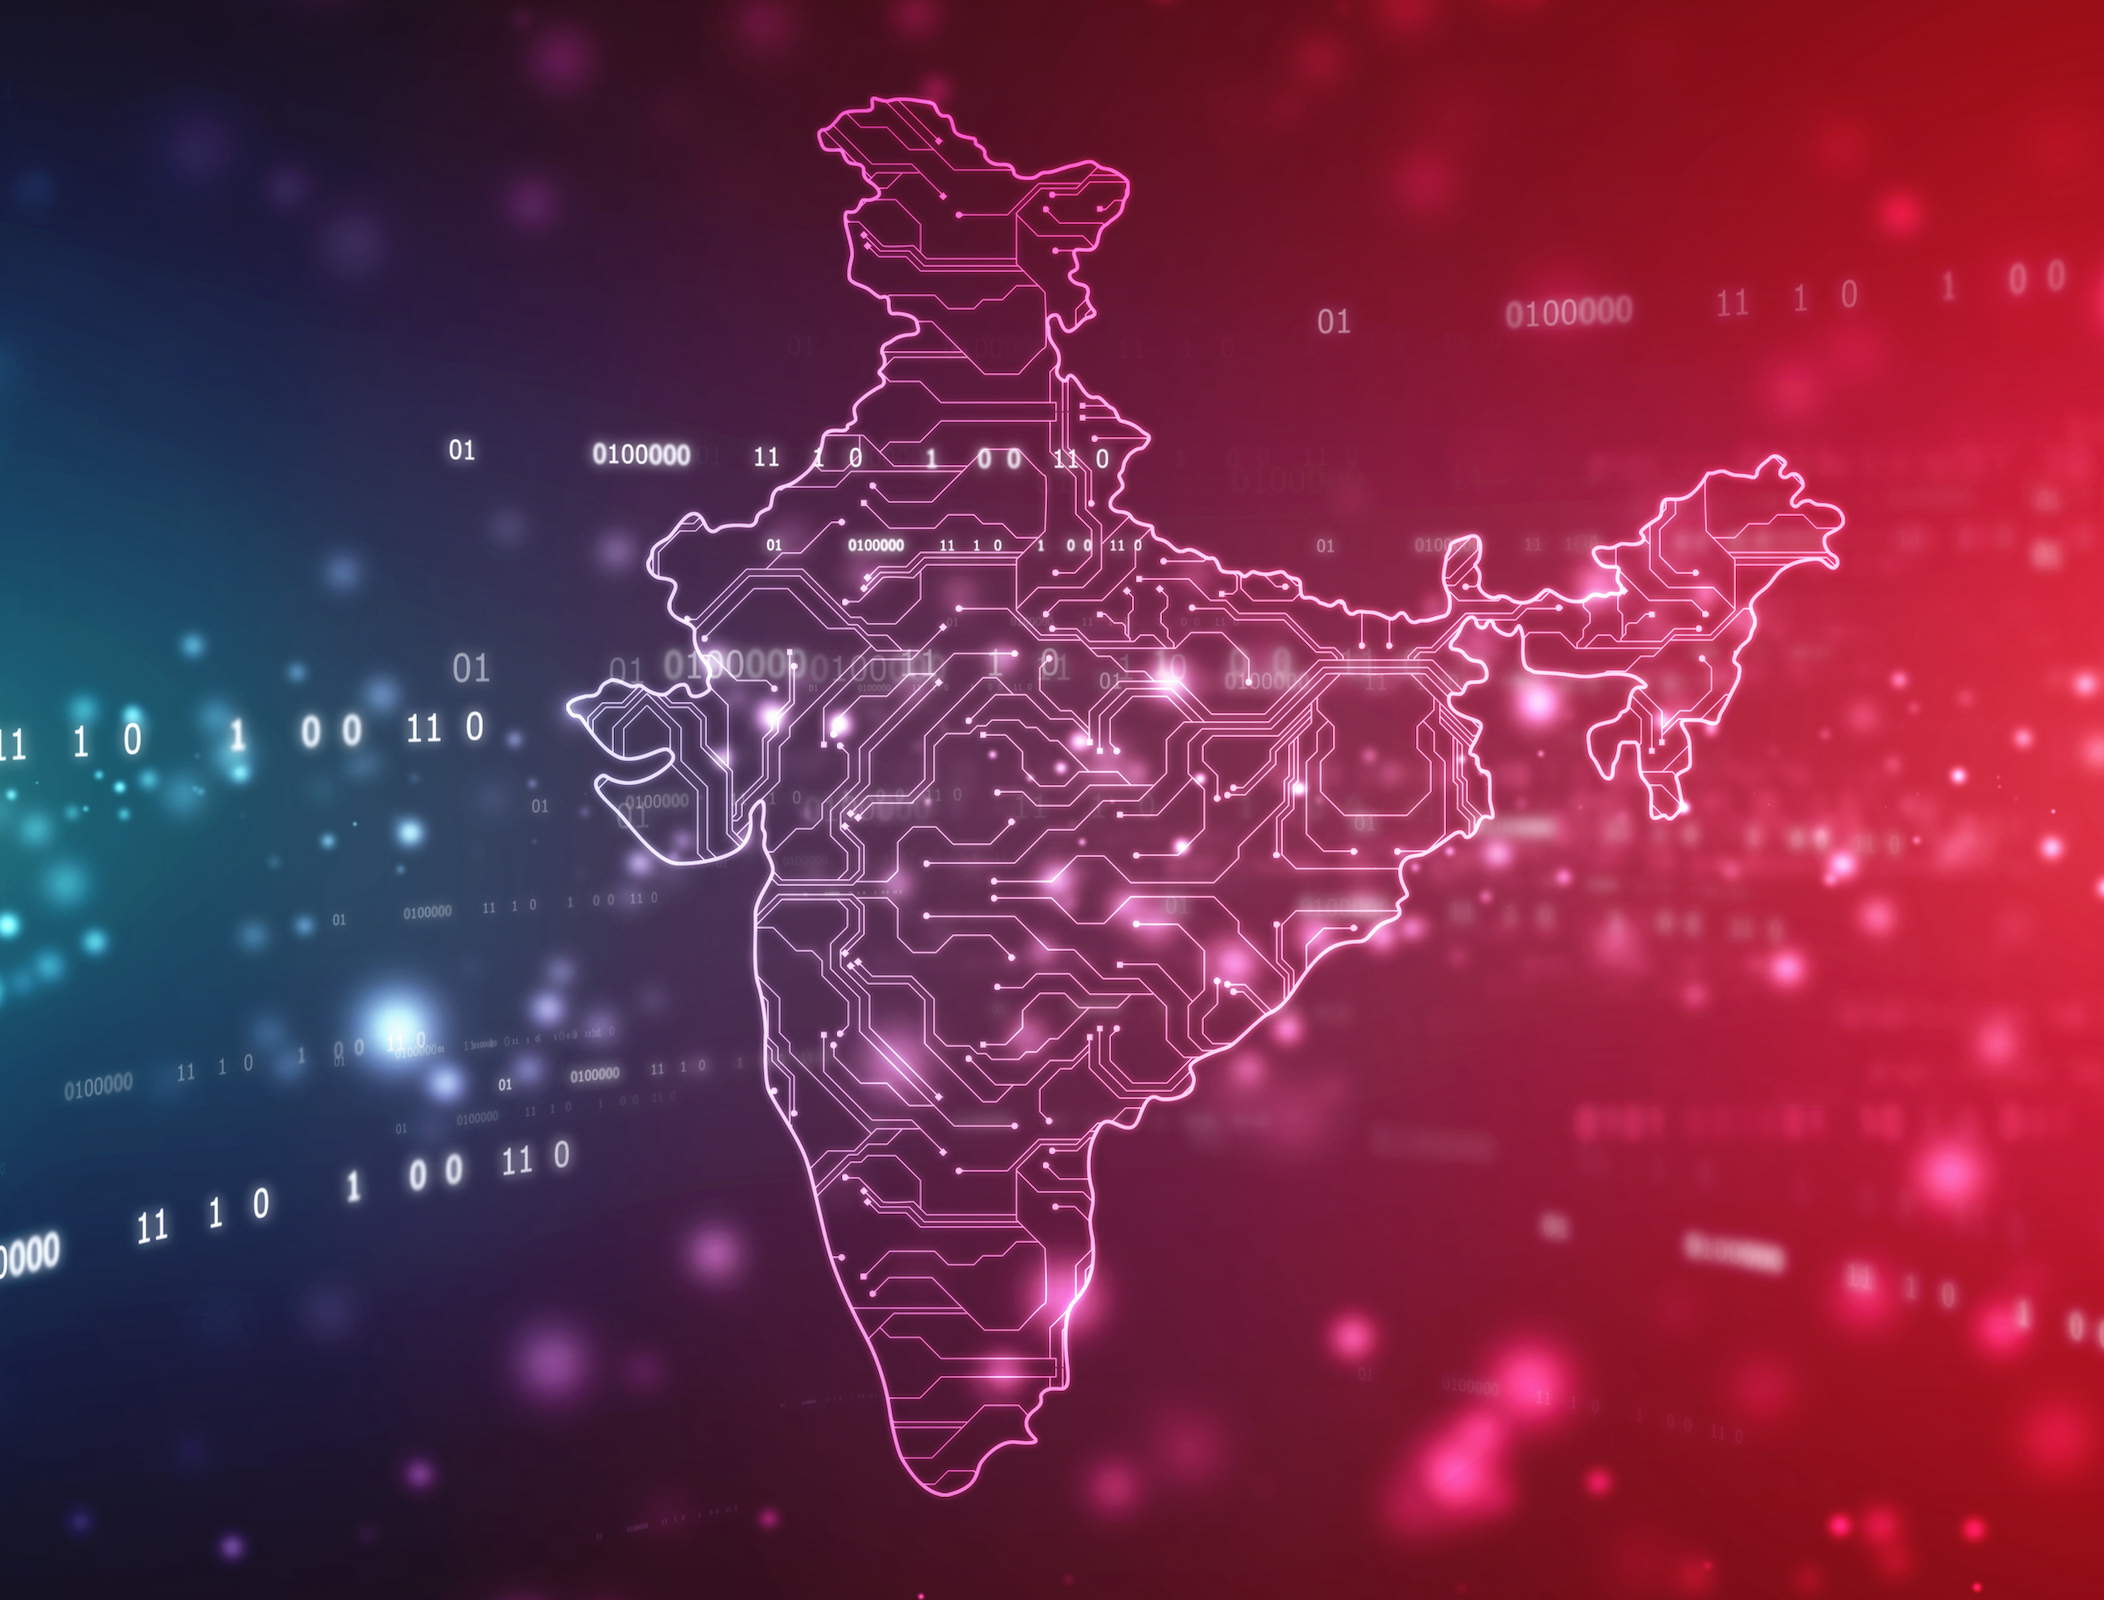 India’s proposed privacy law aims to ease cross-border data transfers